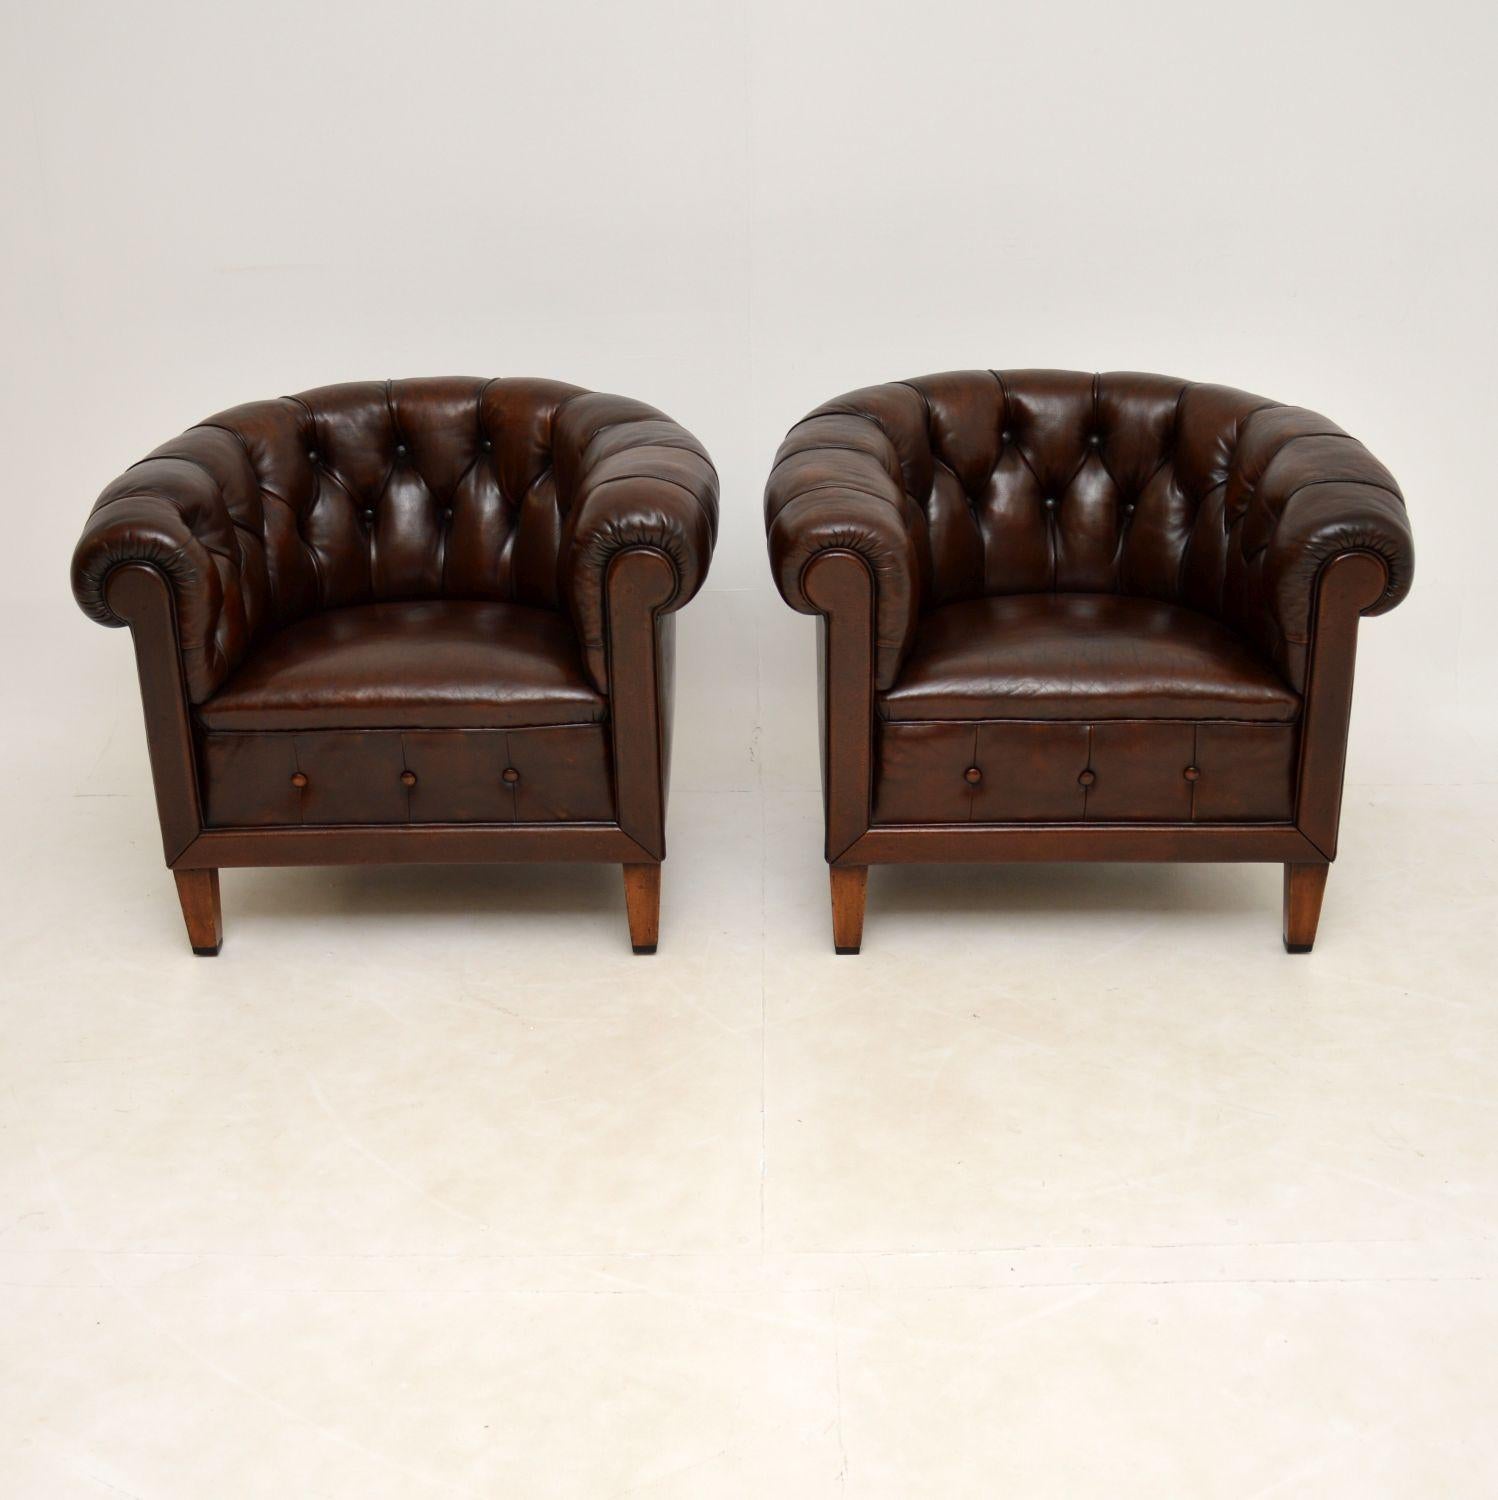 A stunning pair of antique deep buttoned leather Chesterfield armchairs. These were made in Sweden, they date from around the 1900-1910 period.

They are of magnificent quality, with a solid build and beautiful leather upholstery. They are sturdy,